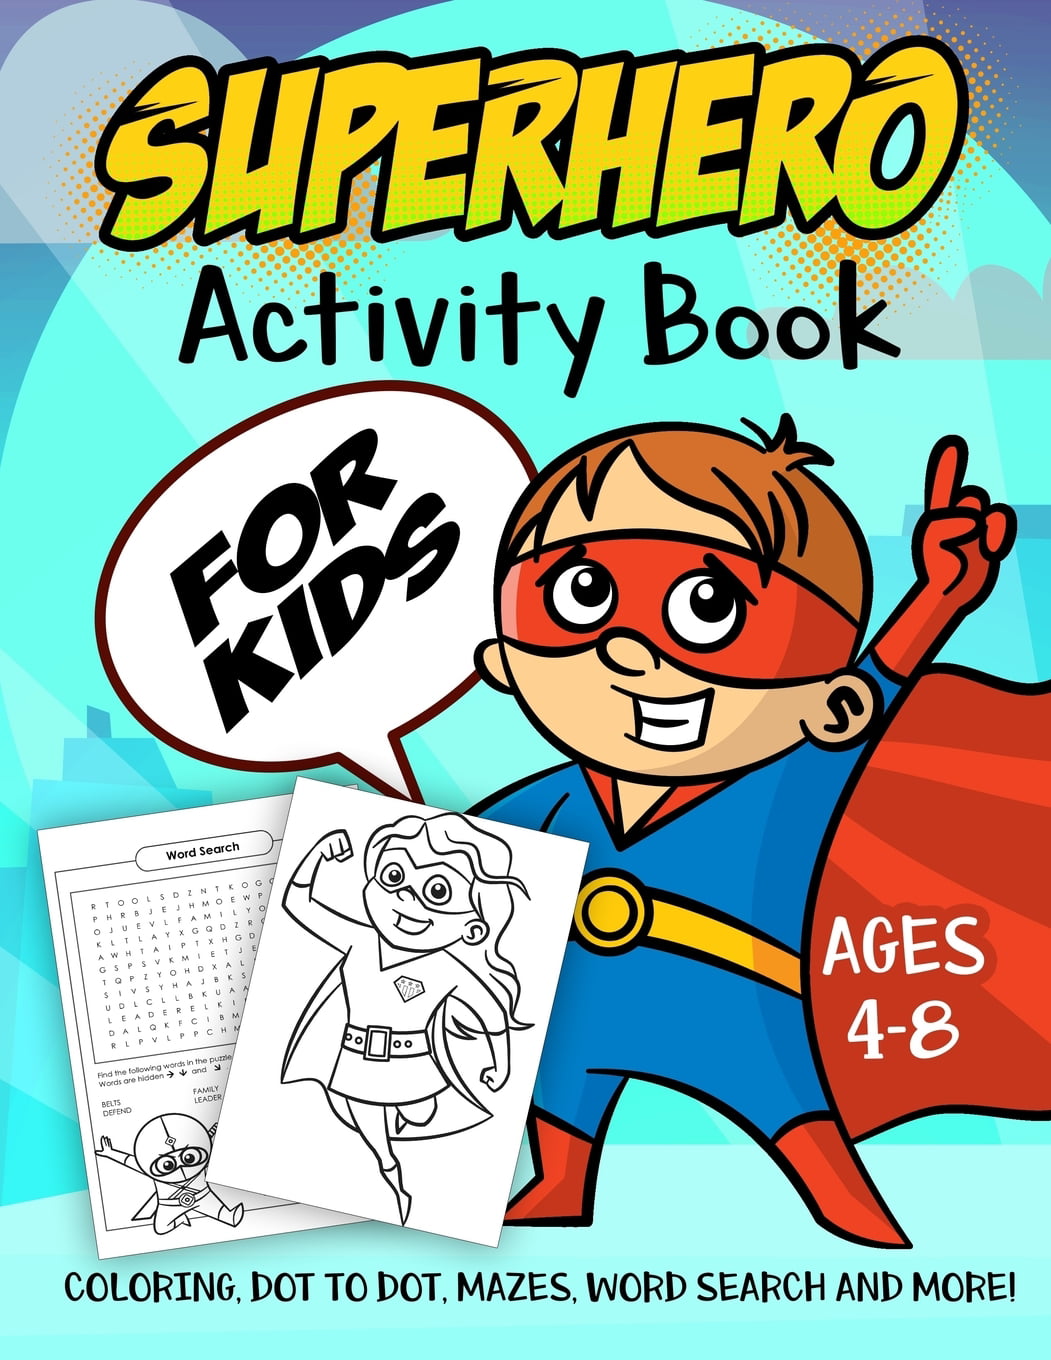 A6 Super Hero Activity Book With Stickers Puzzles Dot To Dot And Colouring Pages 